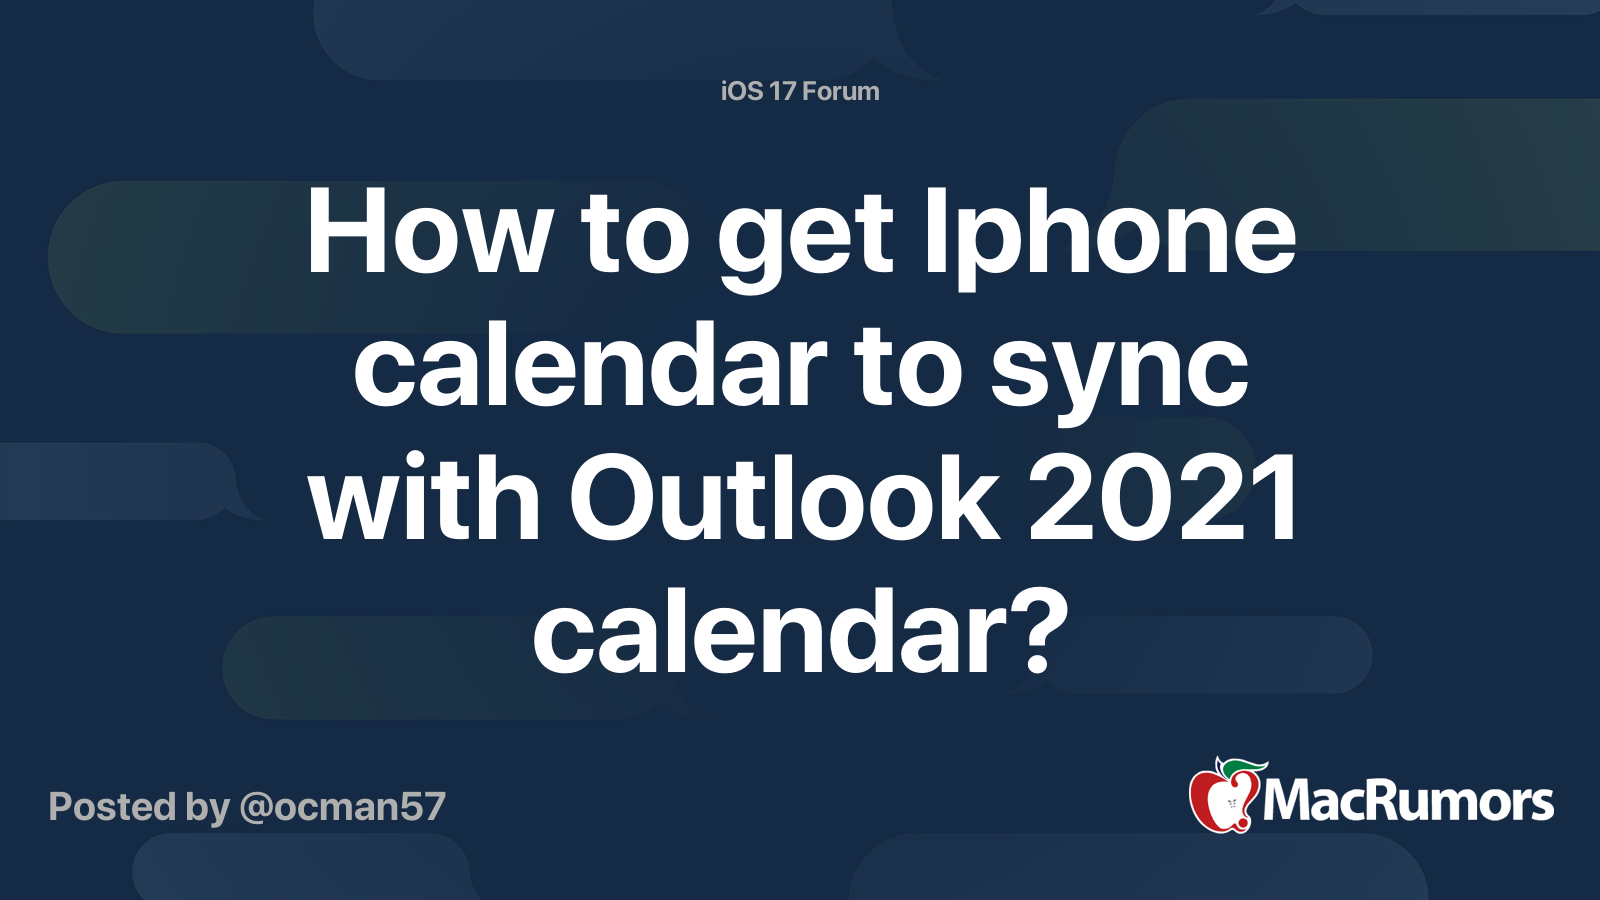 Tips on how to get Apple iphone calendar to sync with Outlook 2021 calendar?